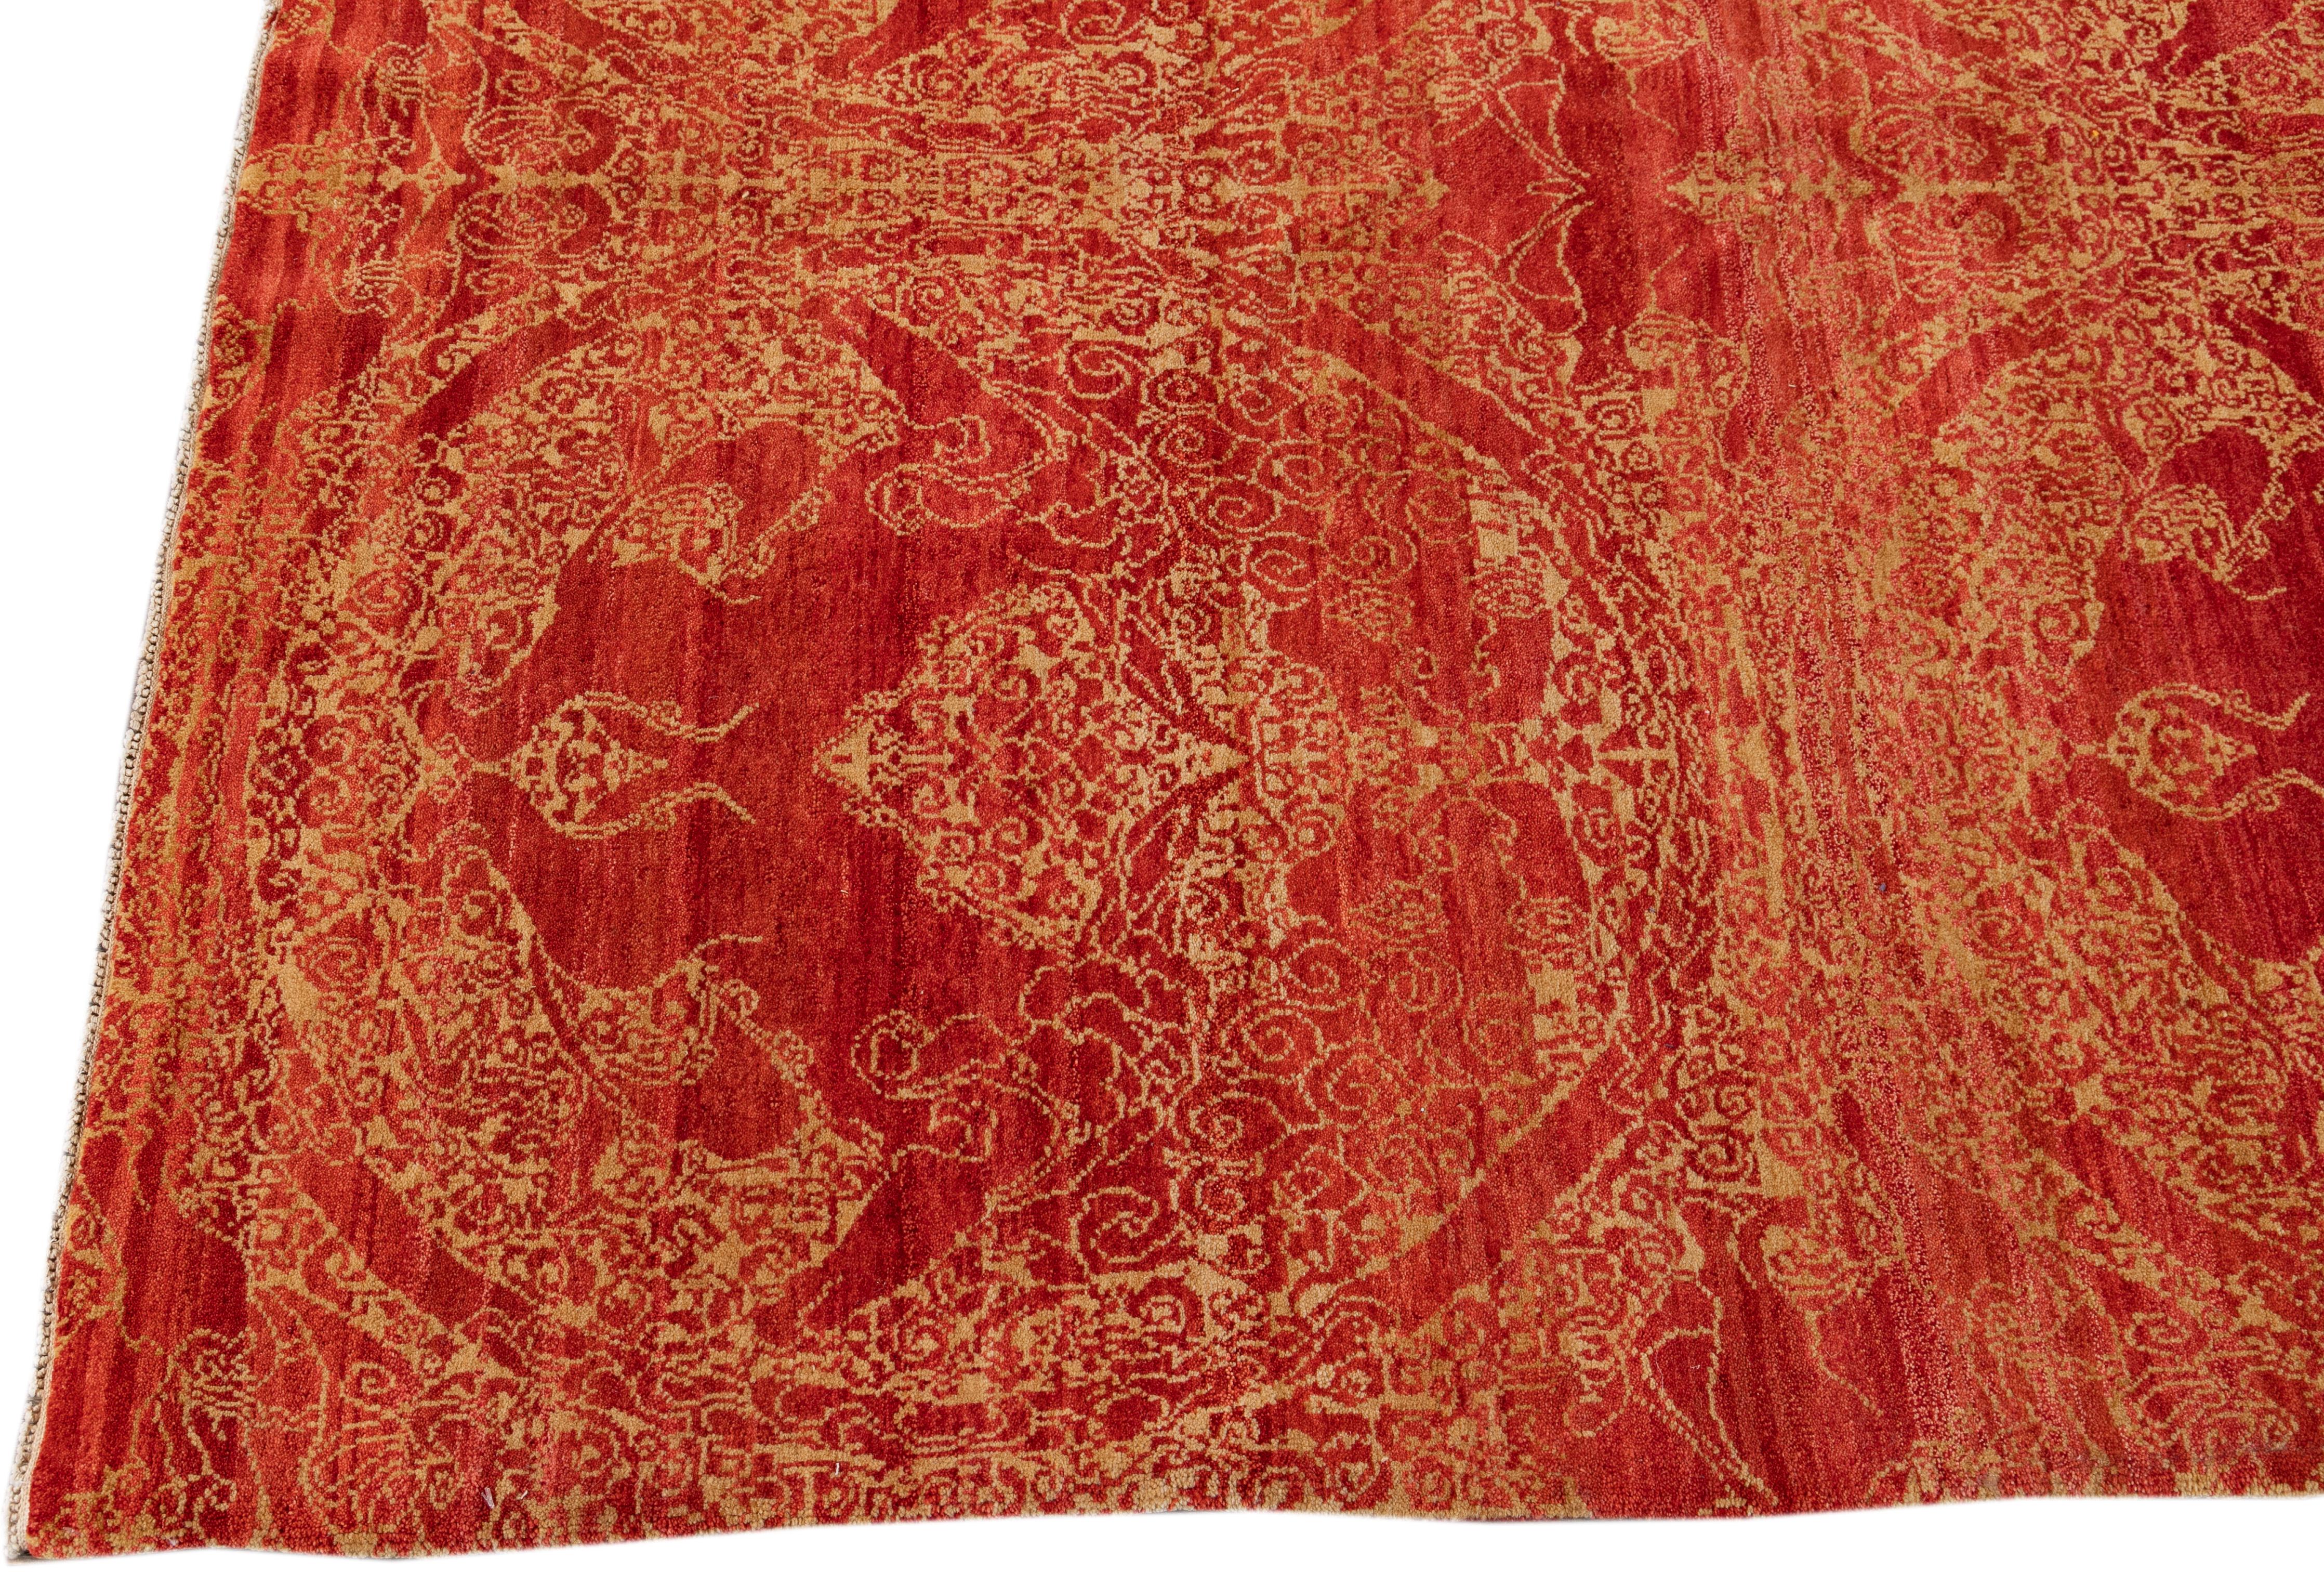 Hand-Woven Modern Spanish Sino Wool Rug Handmade In Red and Beige With Allover Motif For Sale